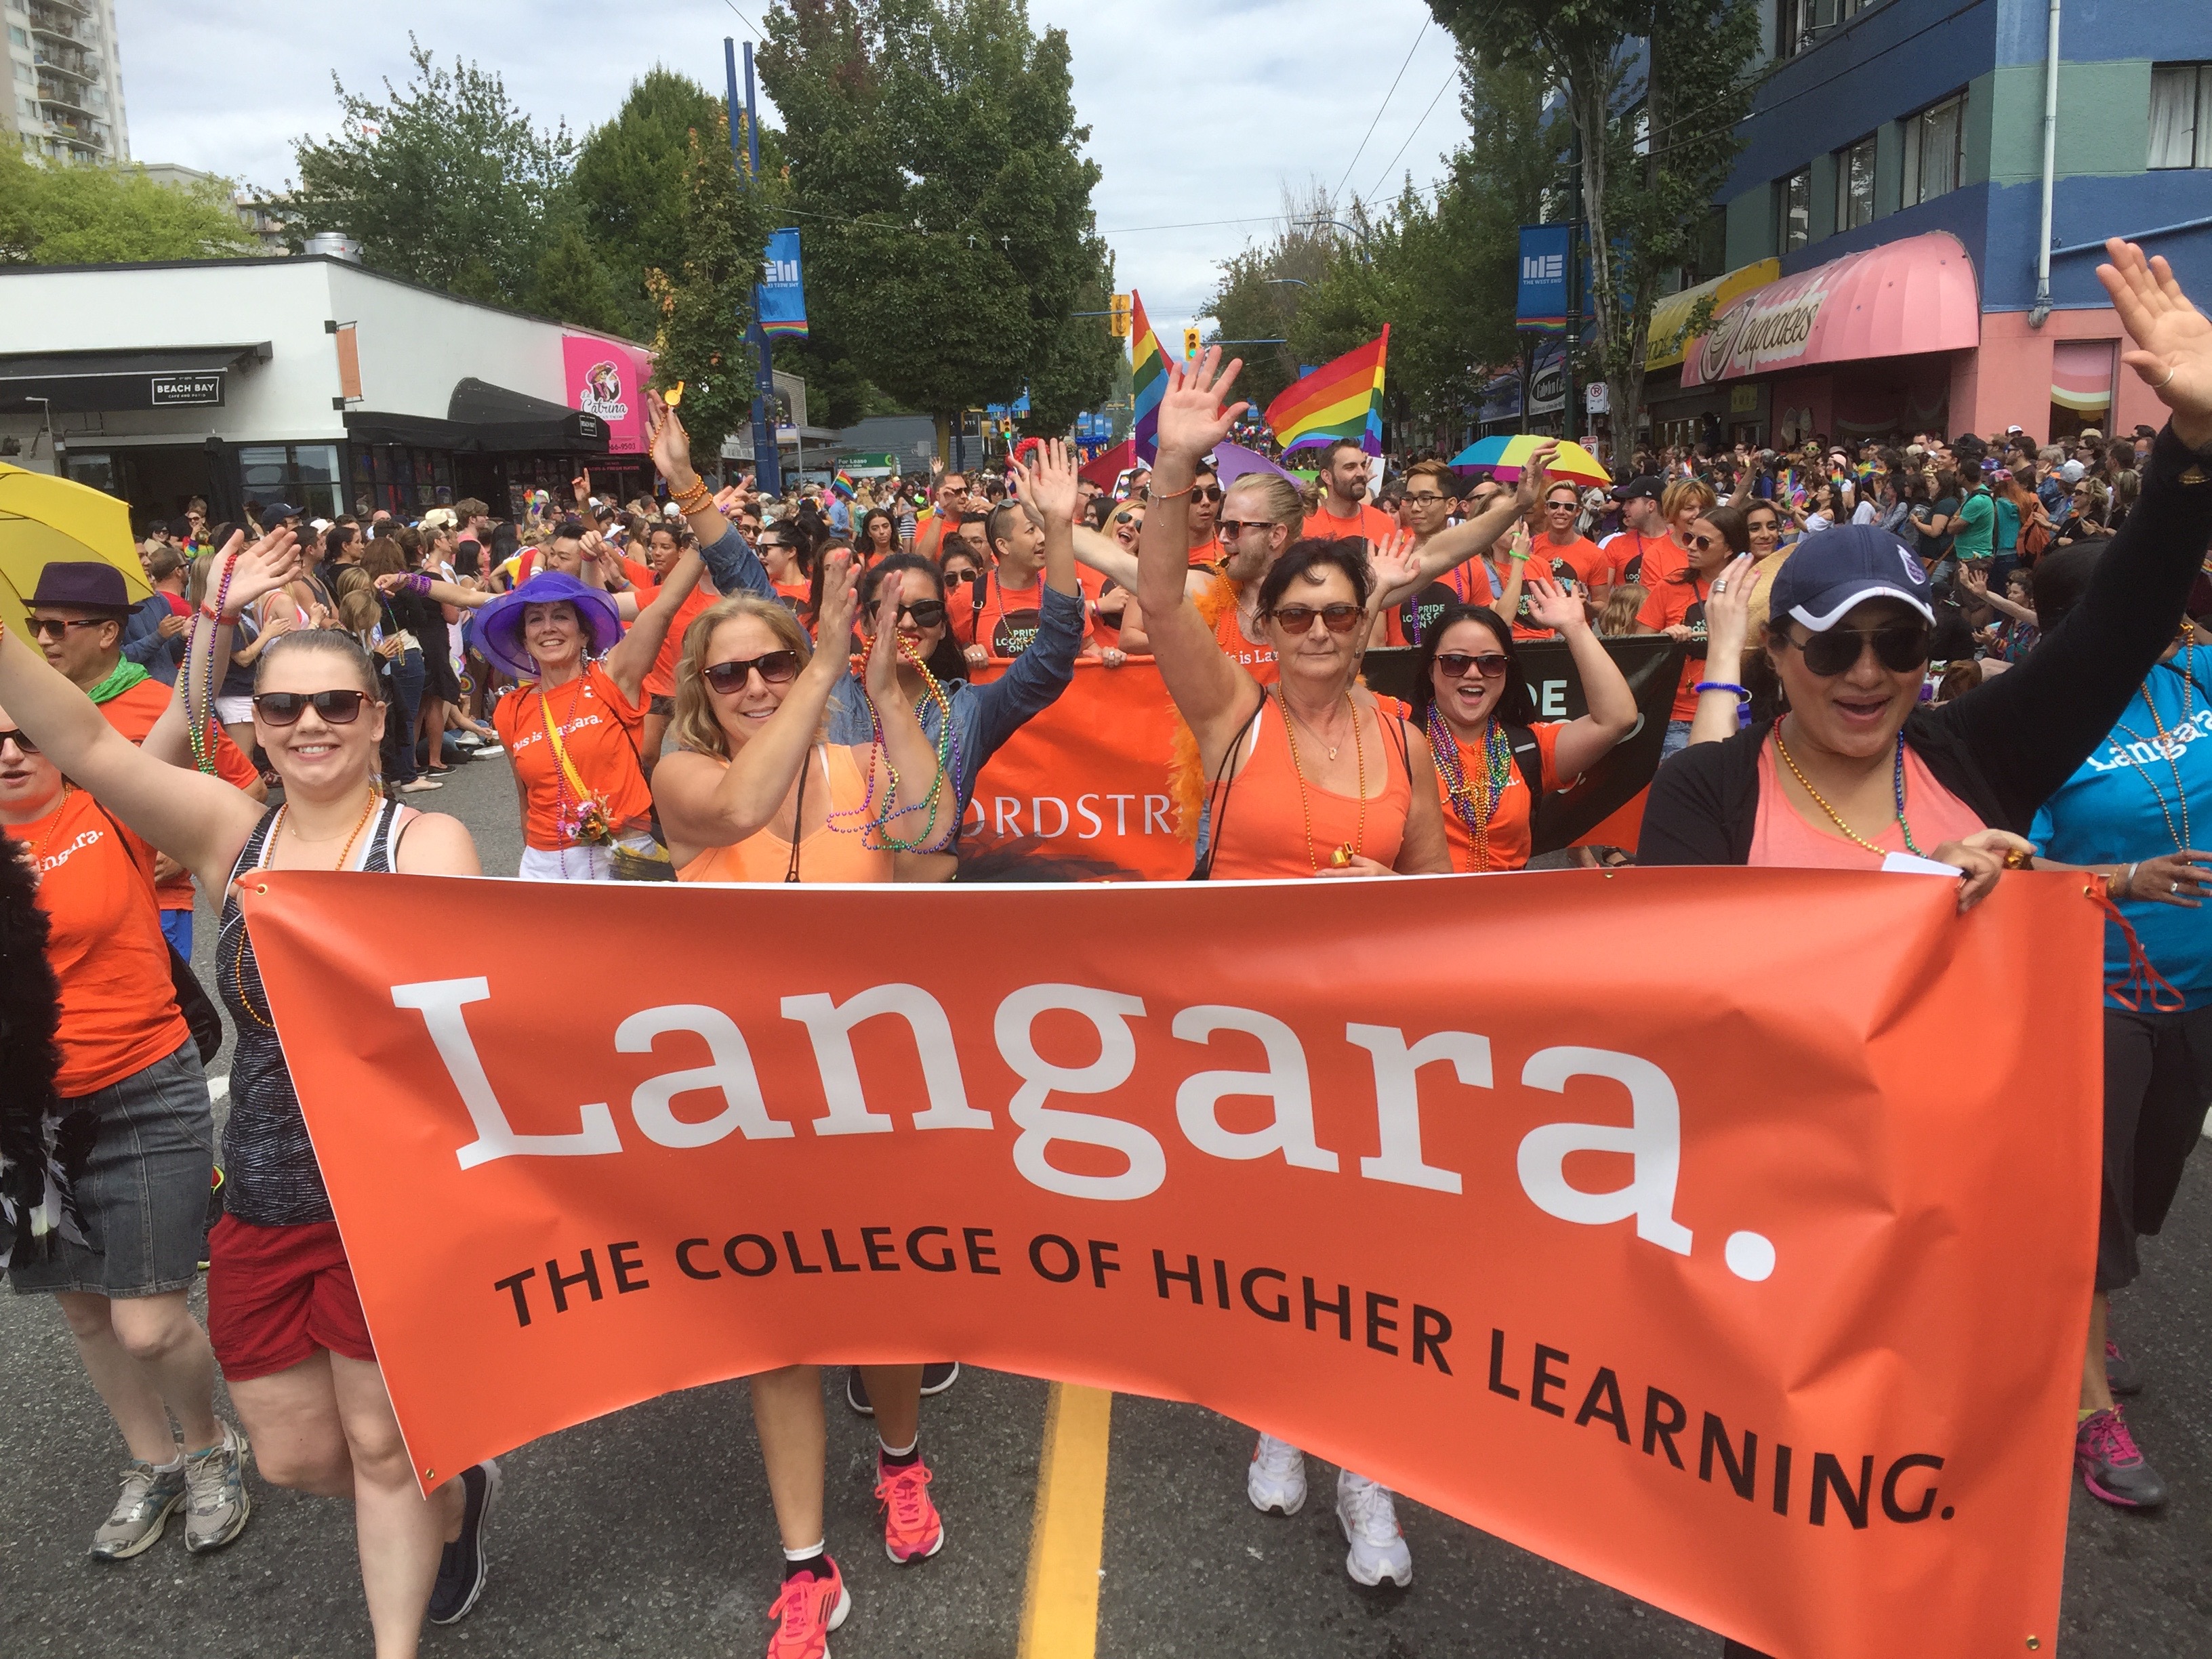 Aug 5 – Walk With Langara In The Pride Parade